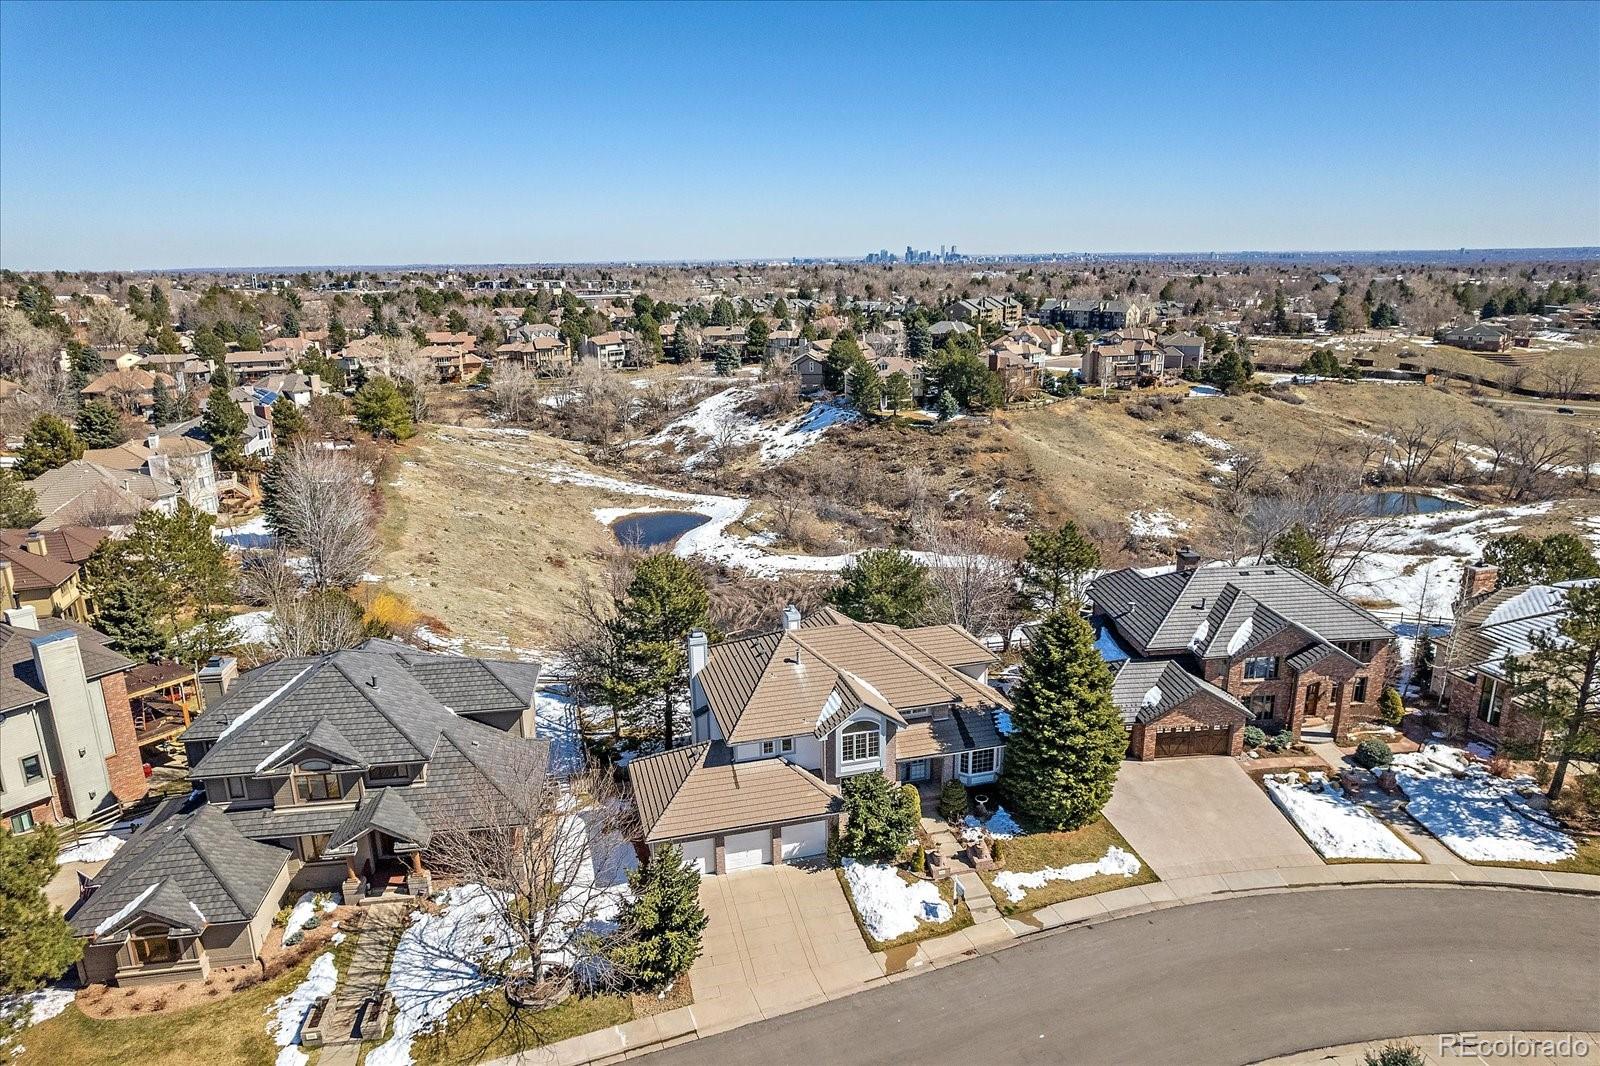 Report Image for 2254 S Queen Street,Lakewood, Colorado